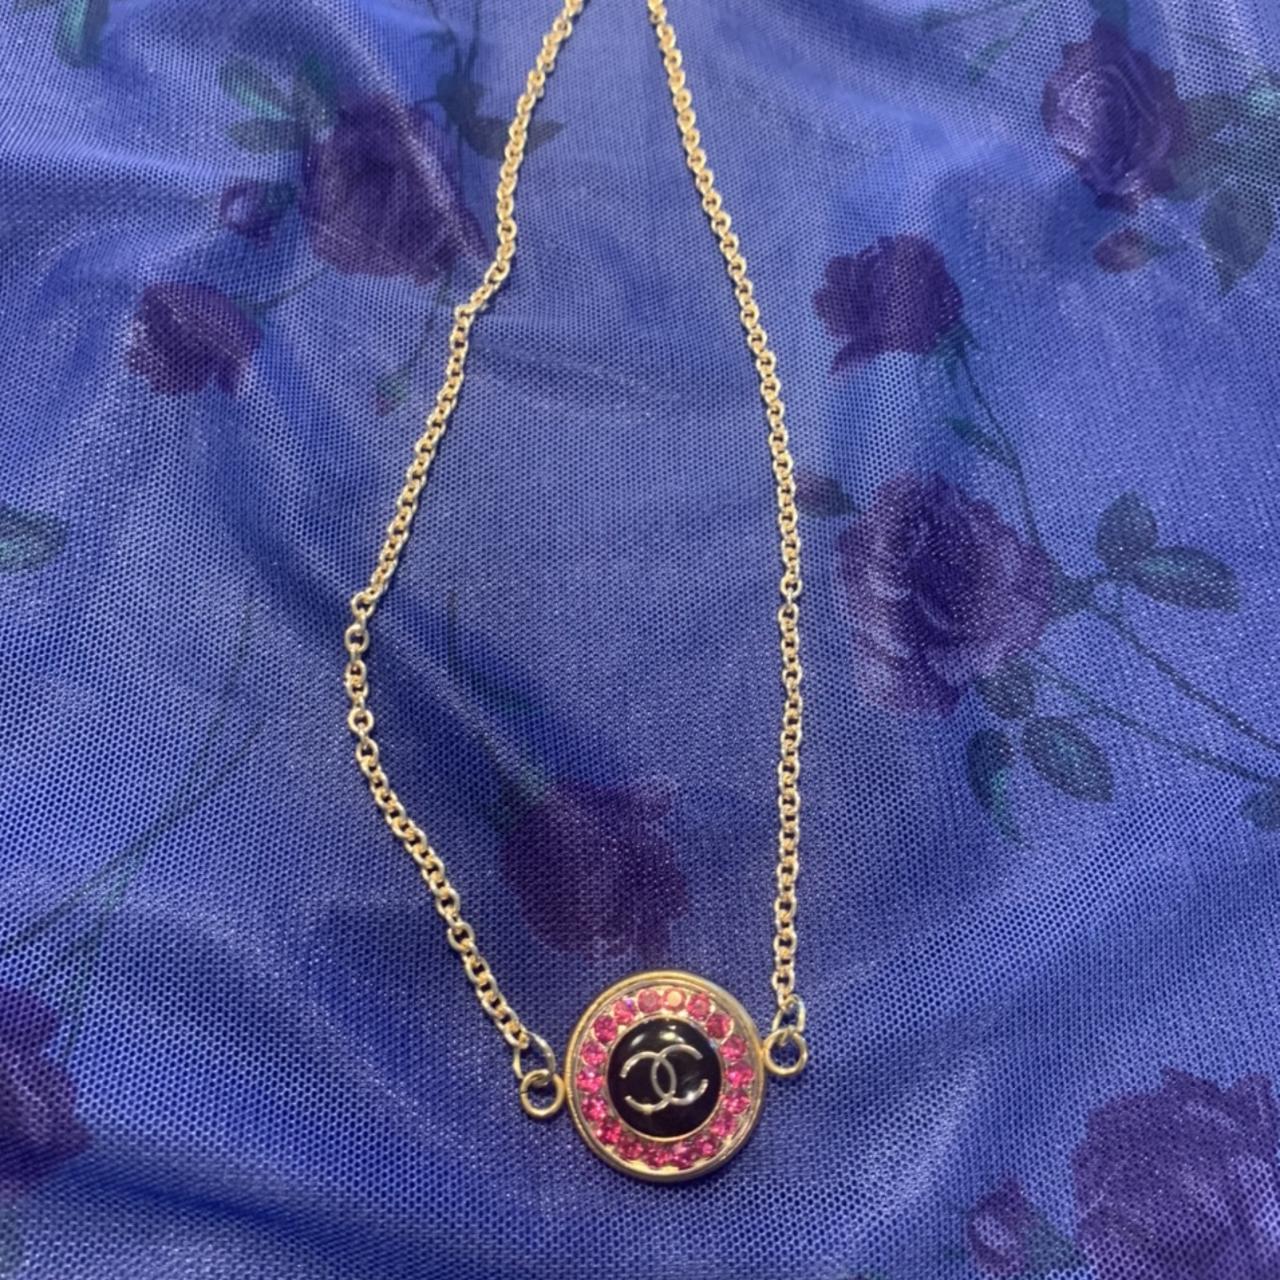 Pink black and gold repurposed Chanel button